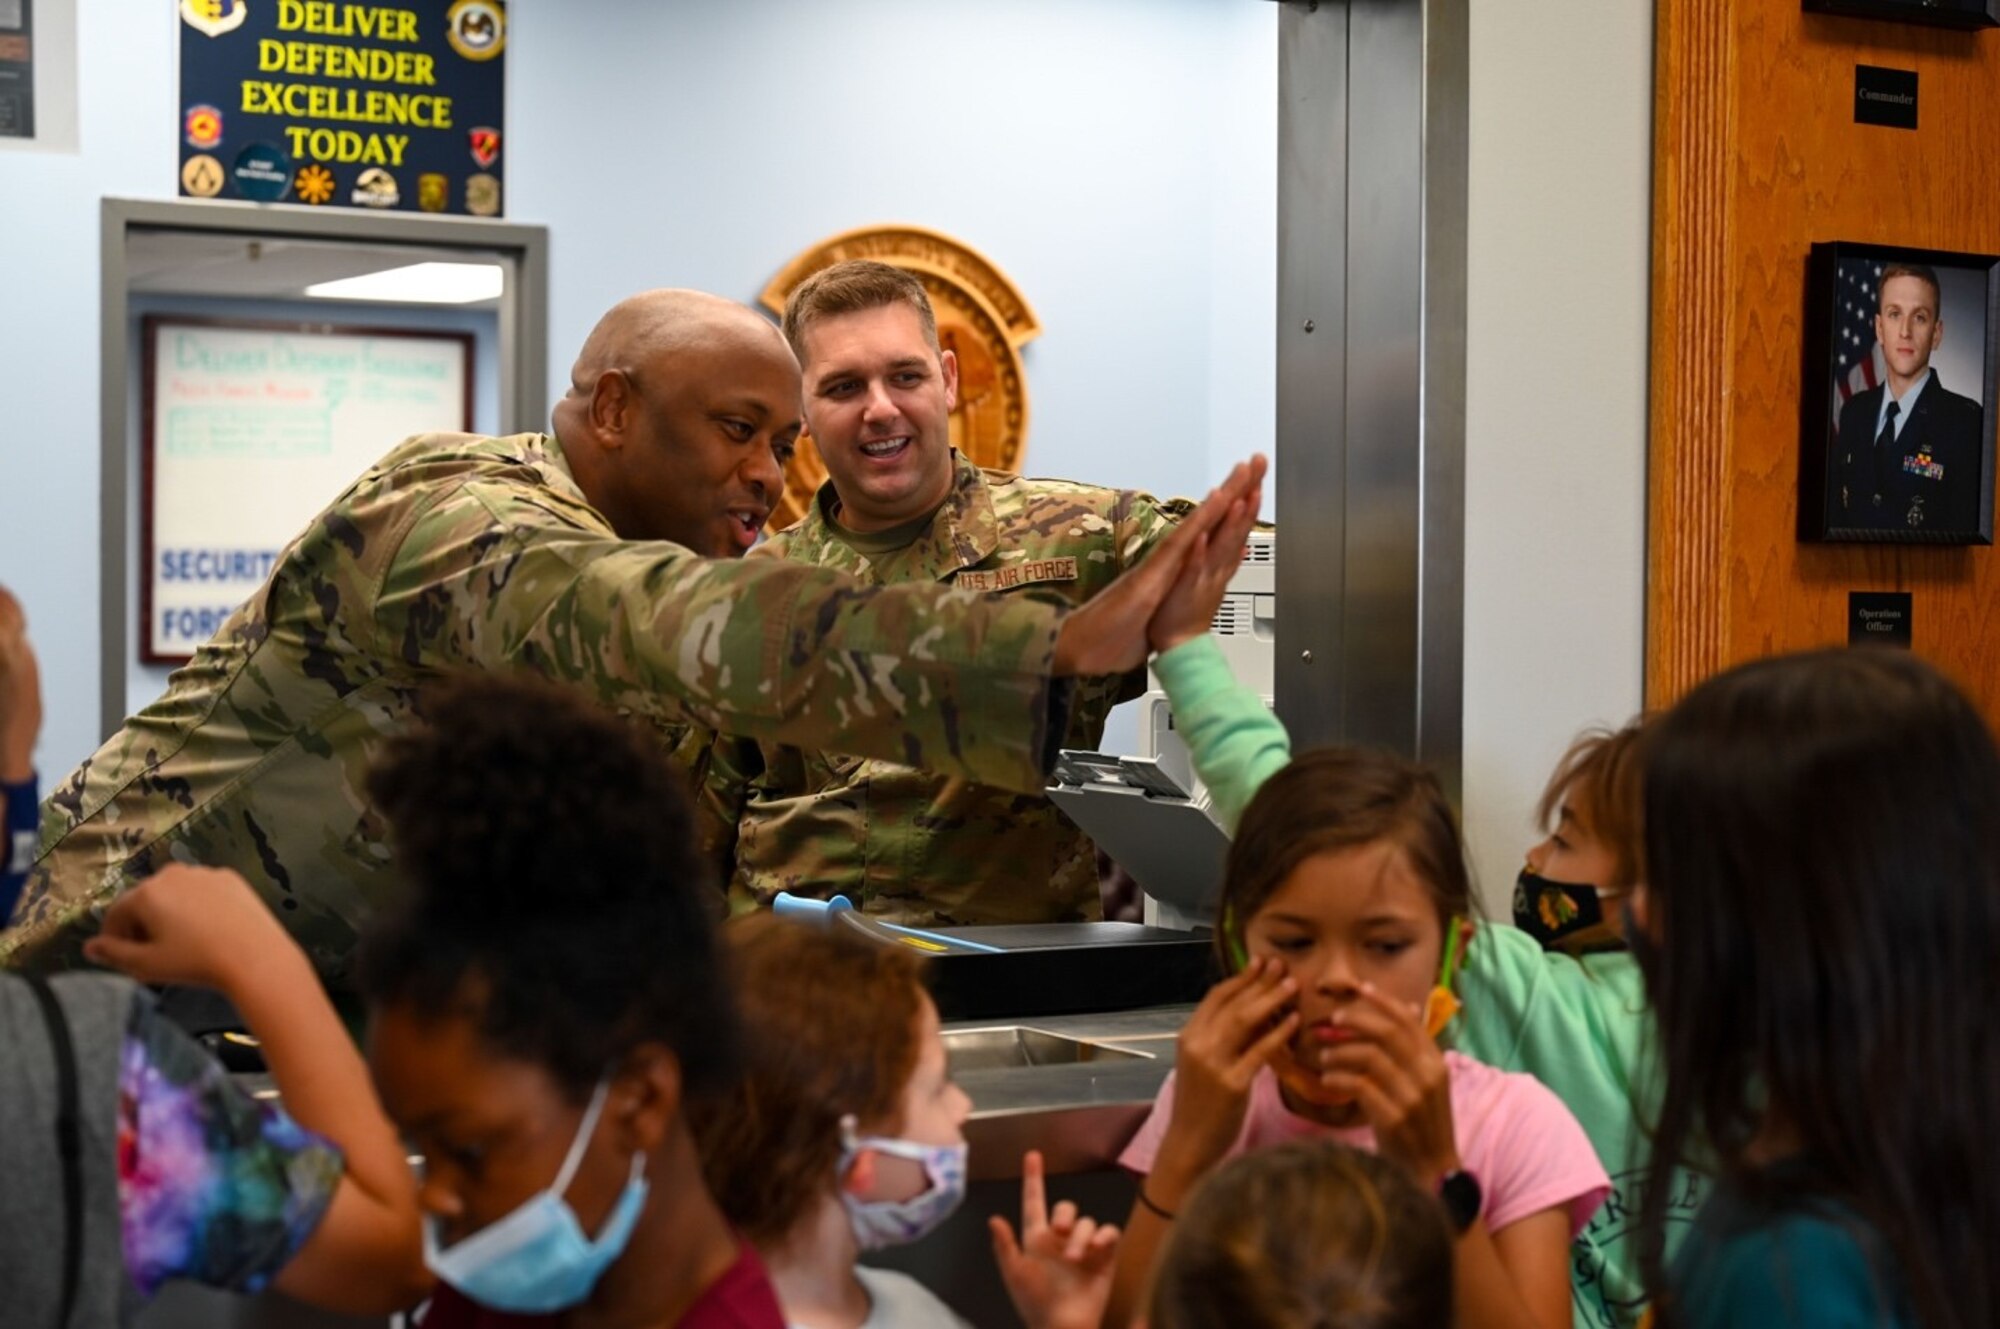 Lt. Col. David Herndon, the 28th Security Forces Squadron commander, gives a high five to one of the children enrolled in the School Age Care program at Ellsworth Air Force Base, S.D., June 25, 2021.